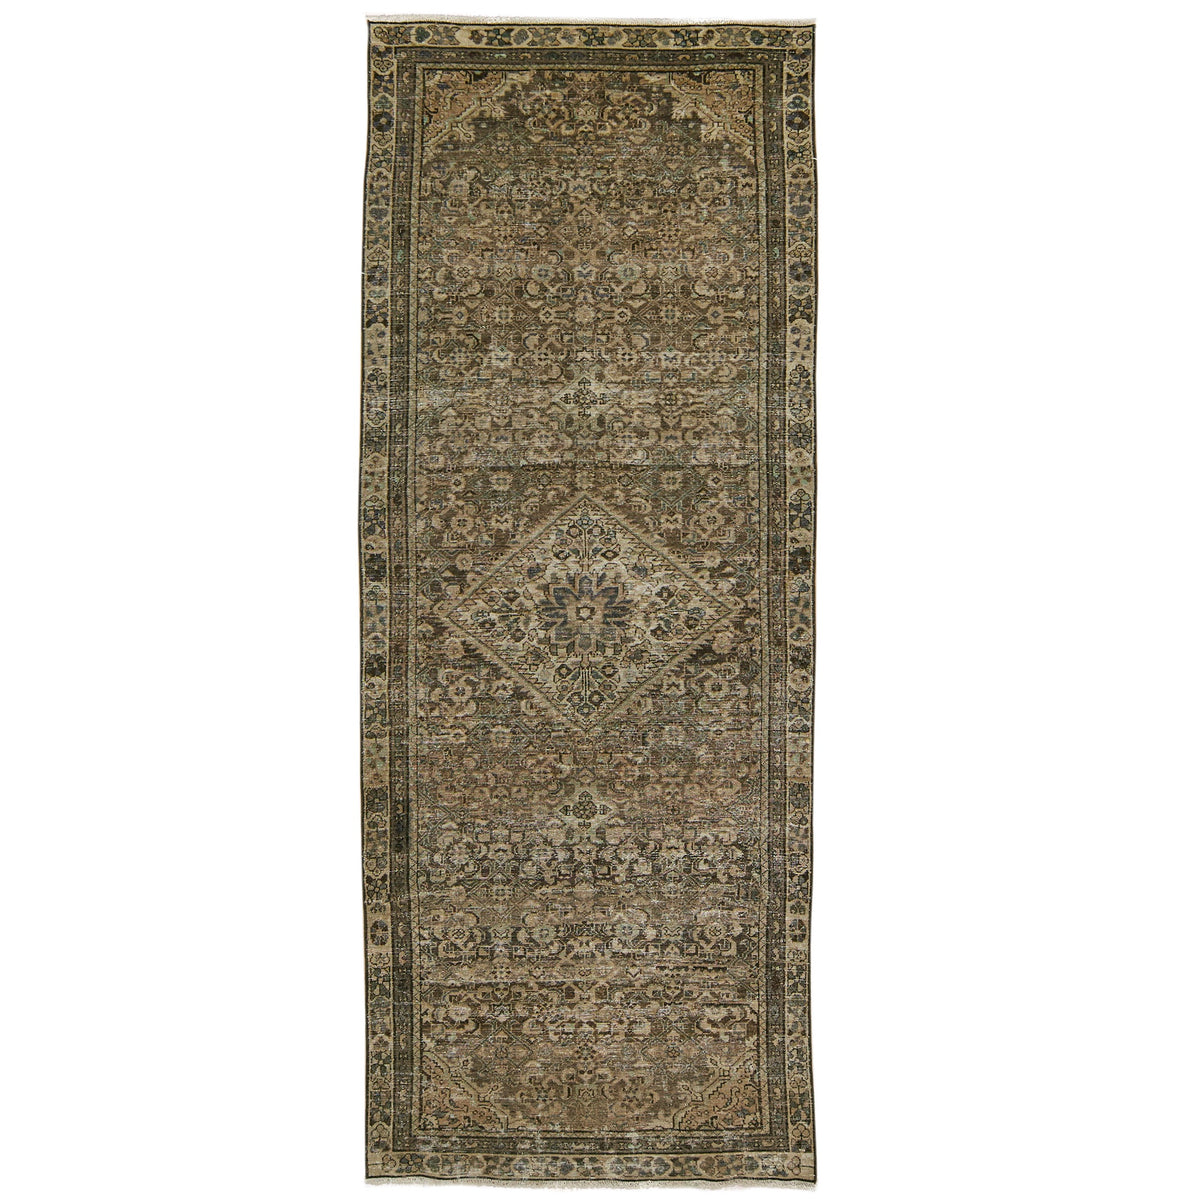 Tigerlily - Timeless Trail of Tradition | Kuden Rugs